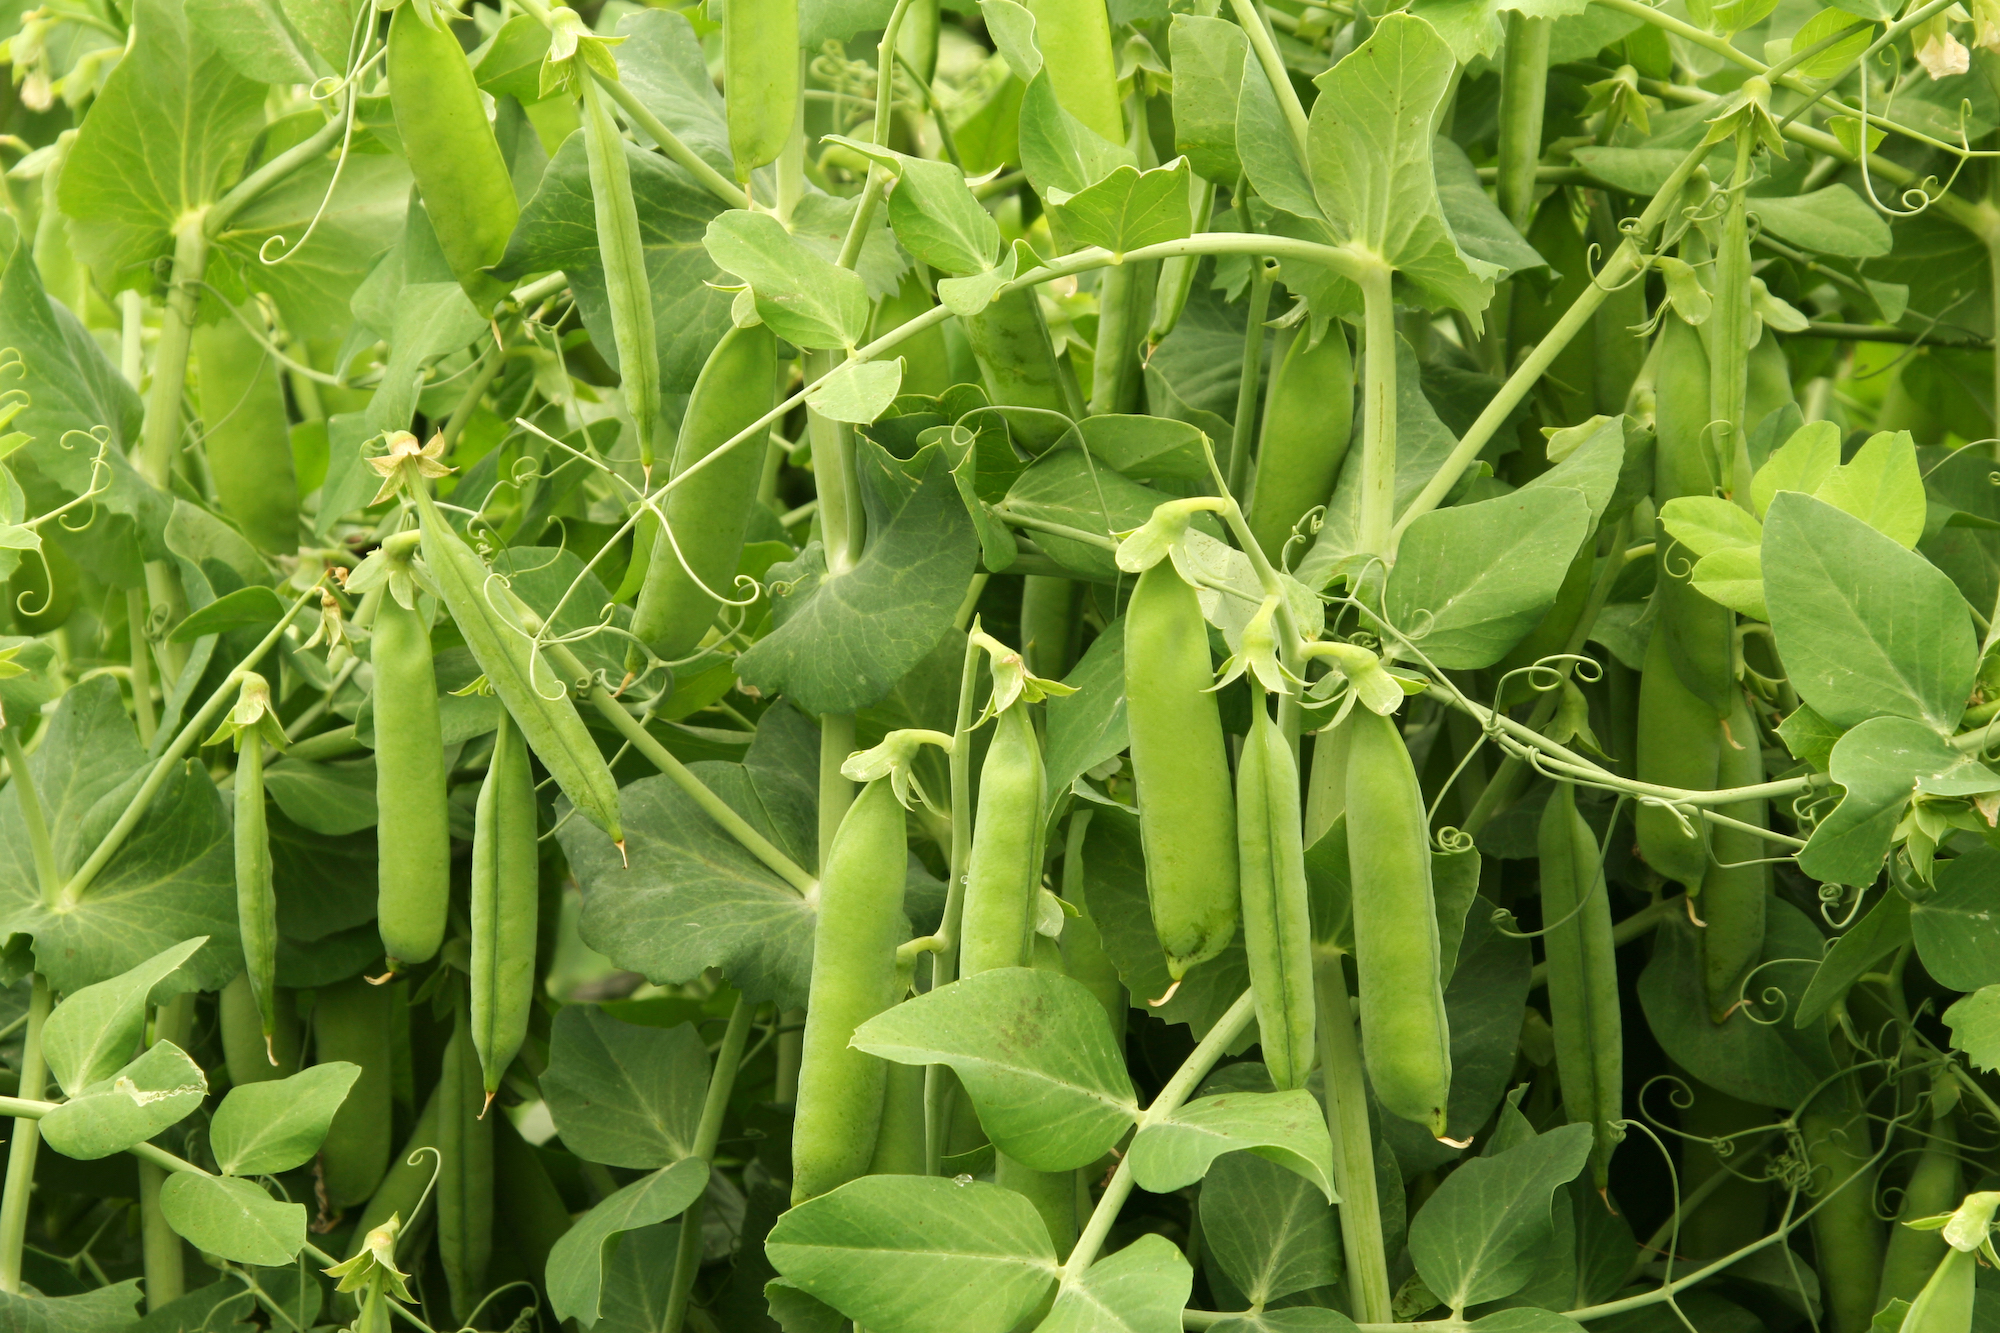 Maintaining Ideal Growing Conditions for Pea Vegetative Growth